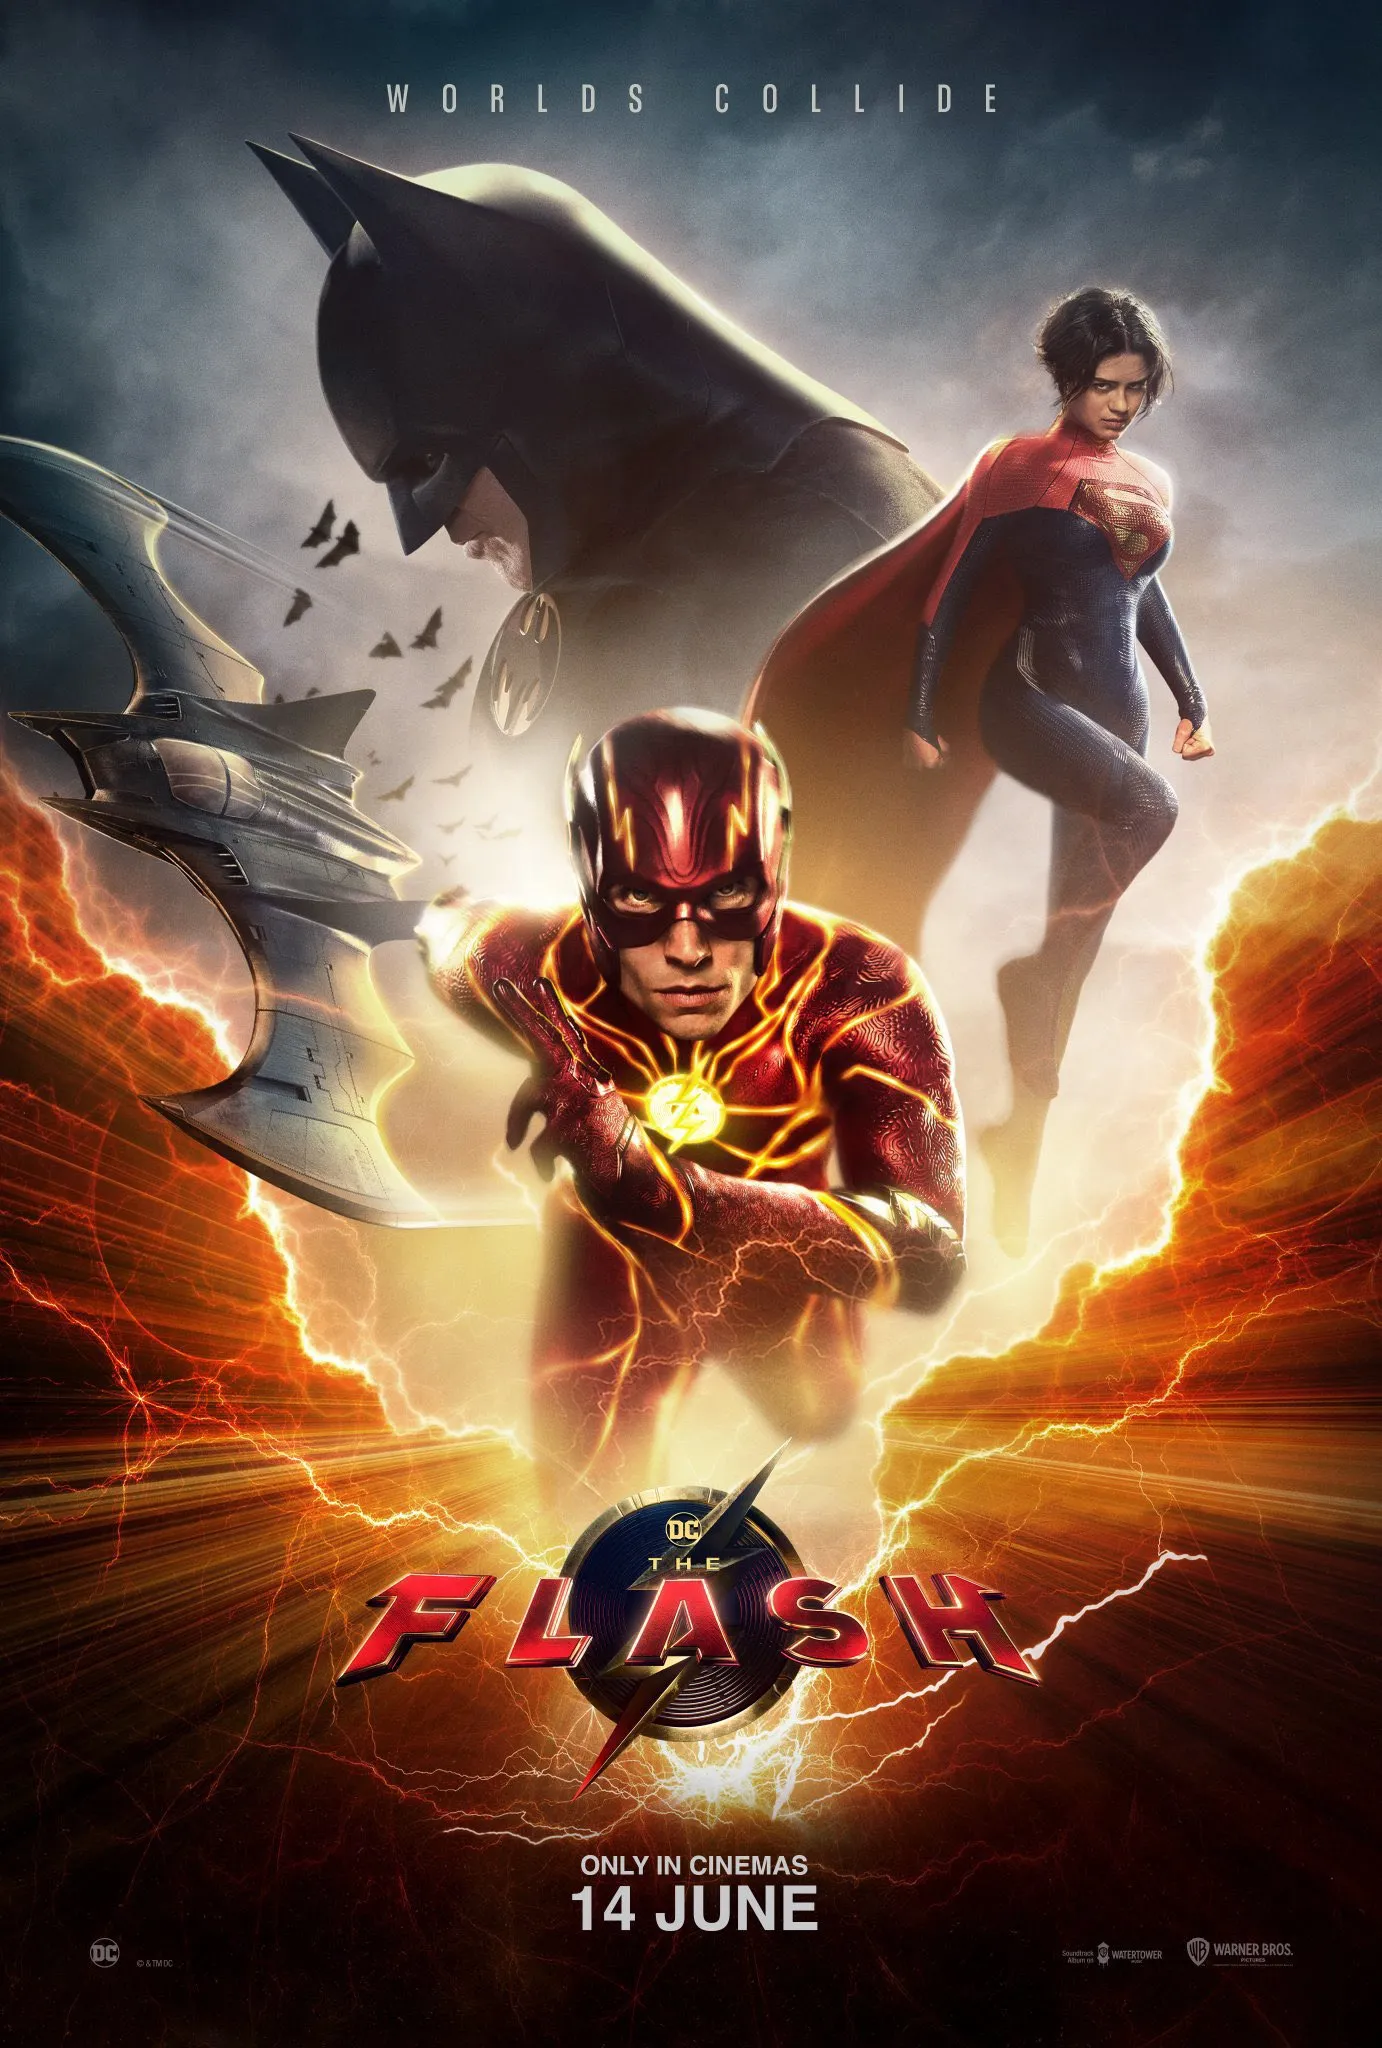 Despite its poor reception, The Flash was actually a thrilling, exciting, and intense superhero film.